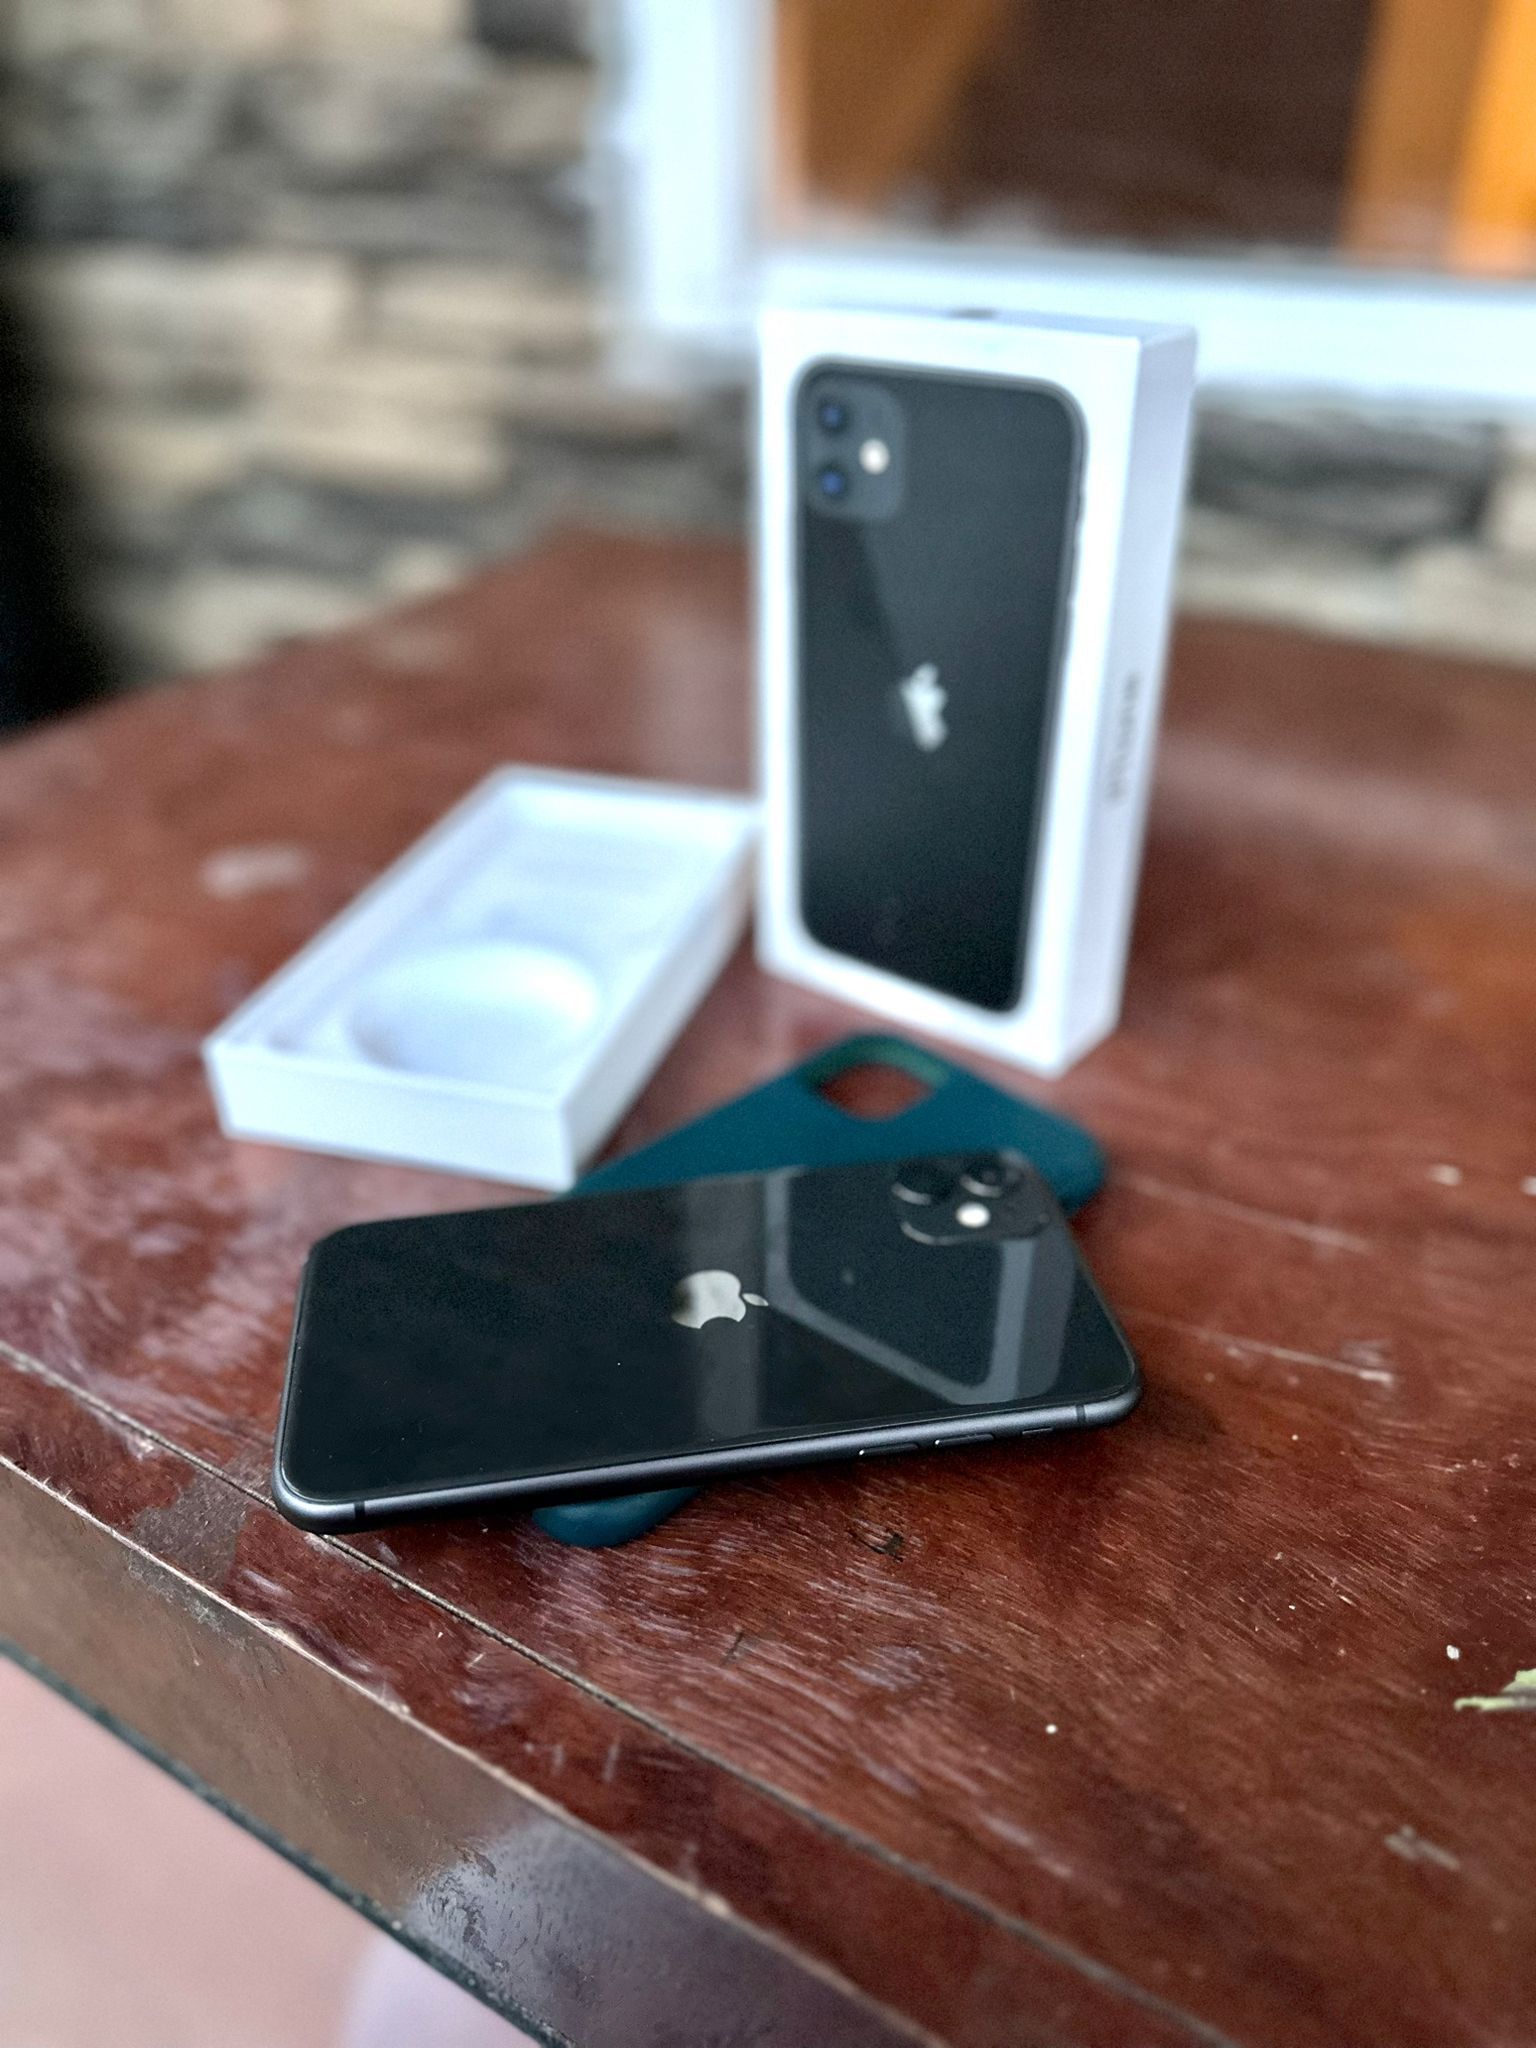 Apple iPhone 11 64GB Black - BoostMobile Only